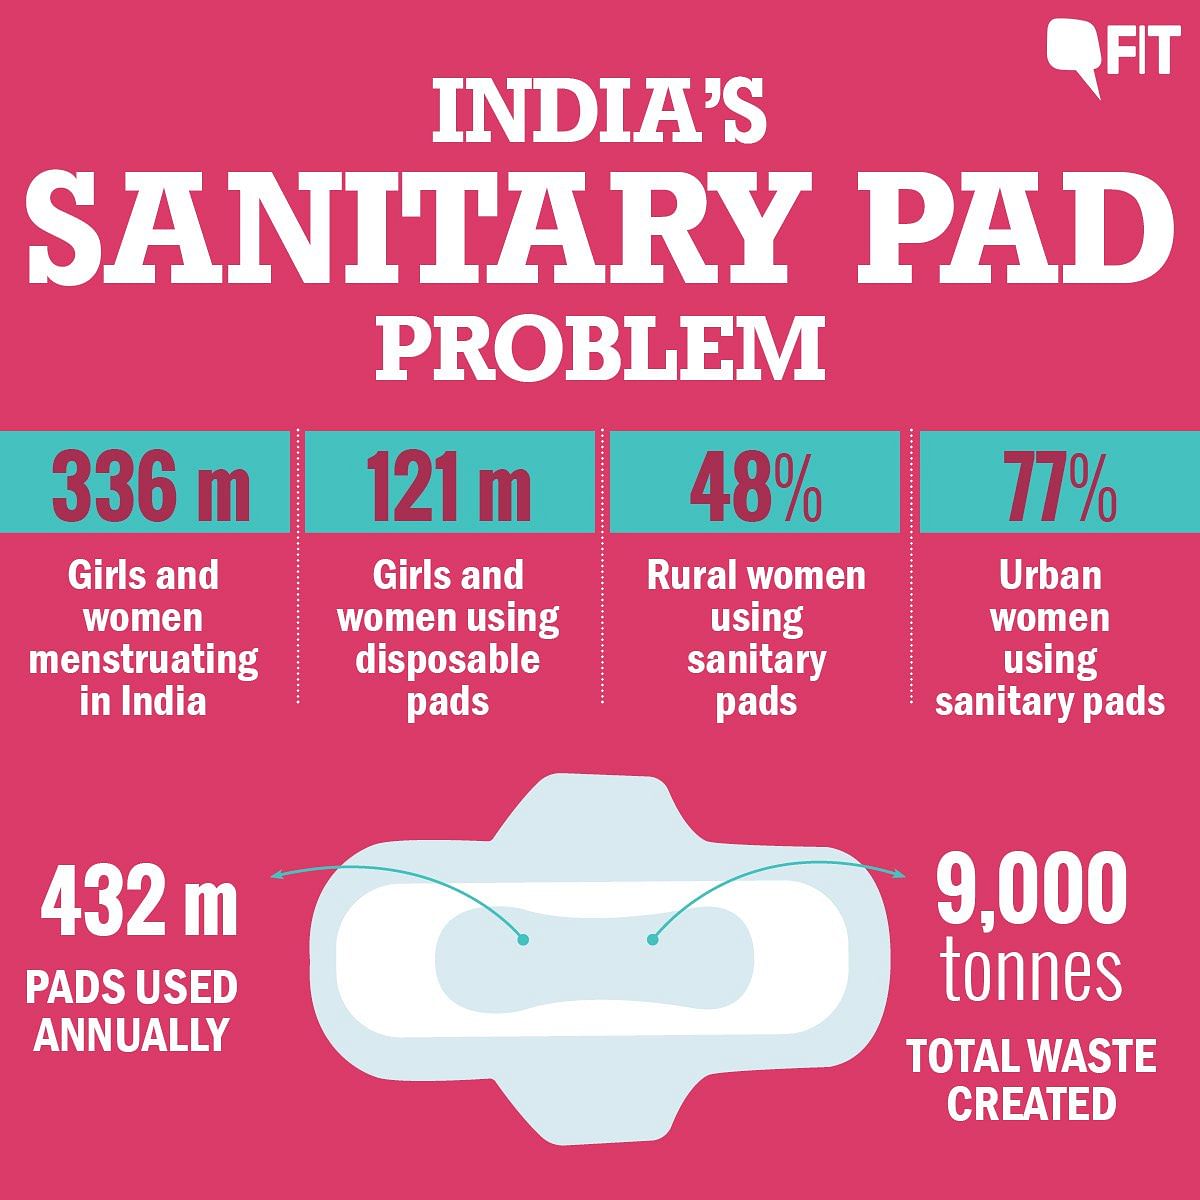 There are 432 million pads being generated annually in India, resulting in 9000 tones of sanitary waste!